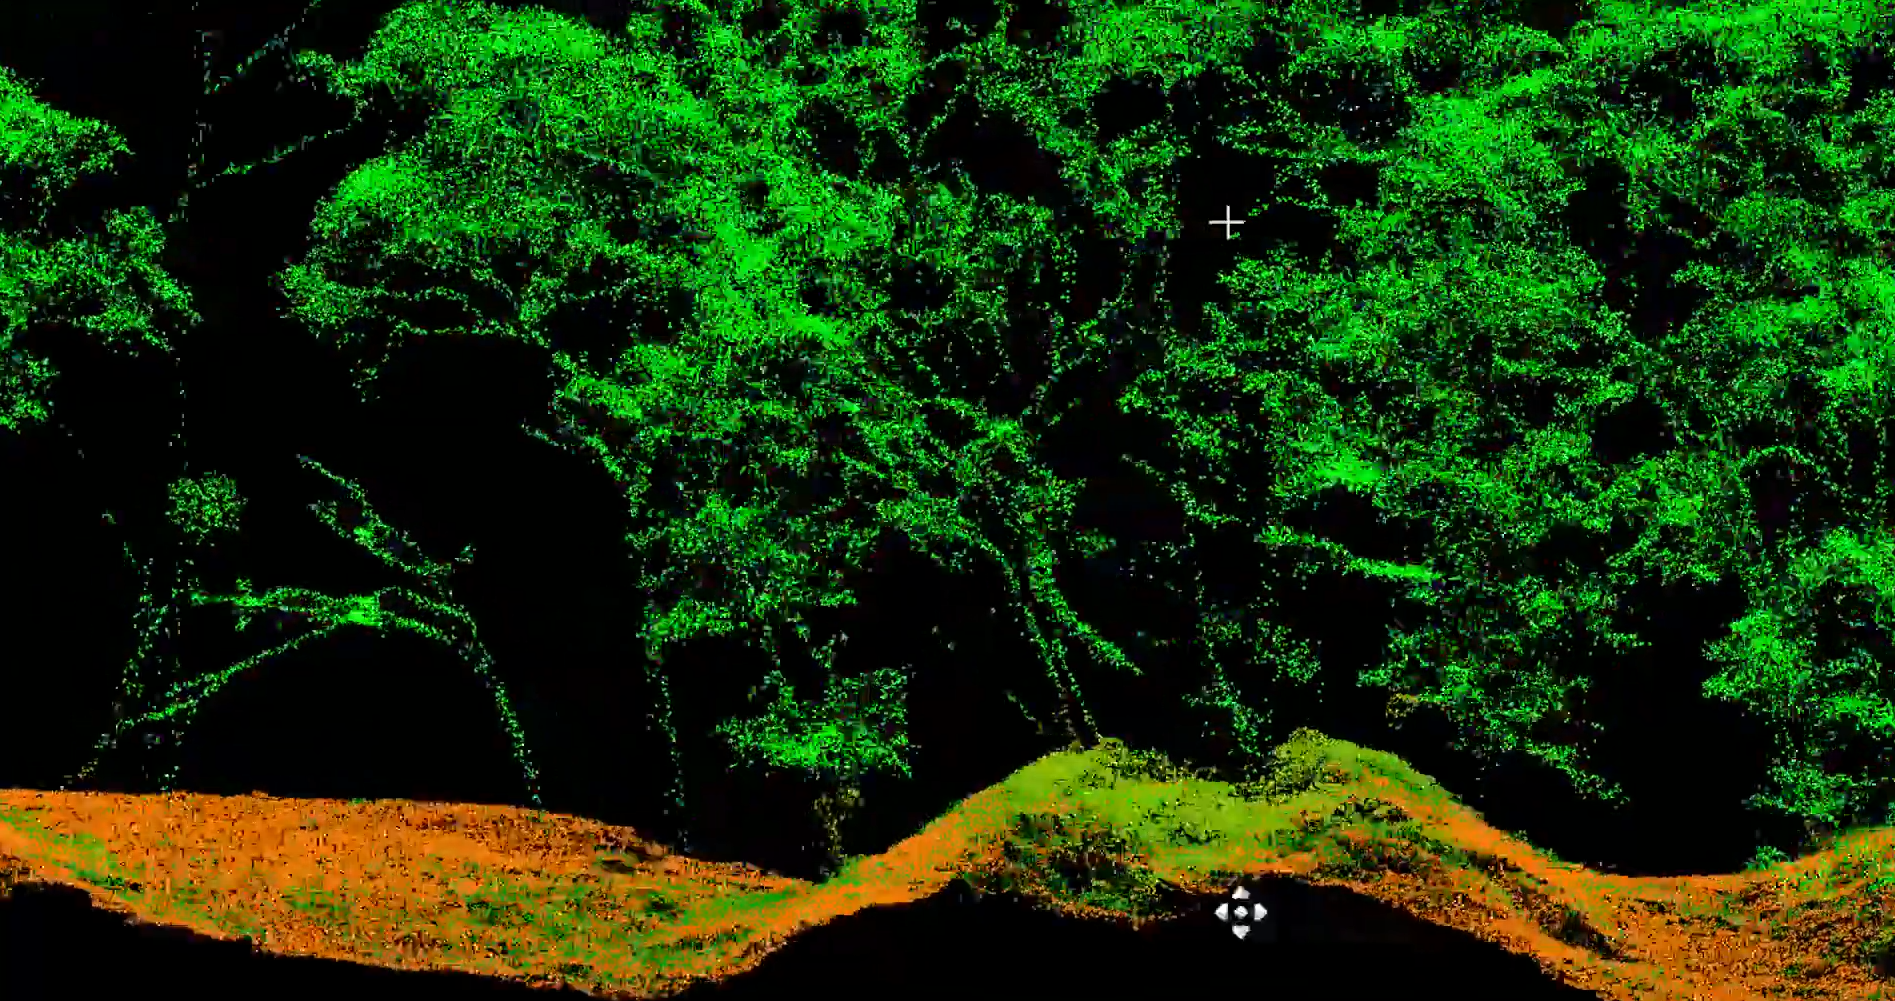 A horizontal LiDAR cross section of Budj Bim showing green points for tree growth, orange and brown points for the terrain, and a black background.  